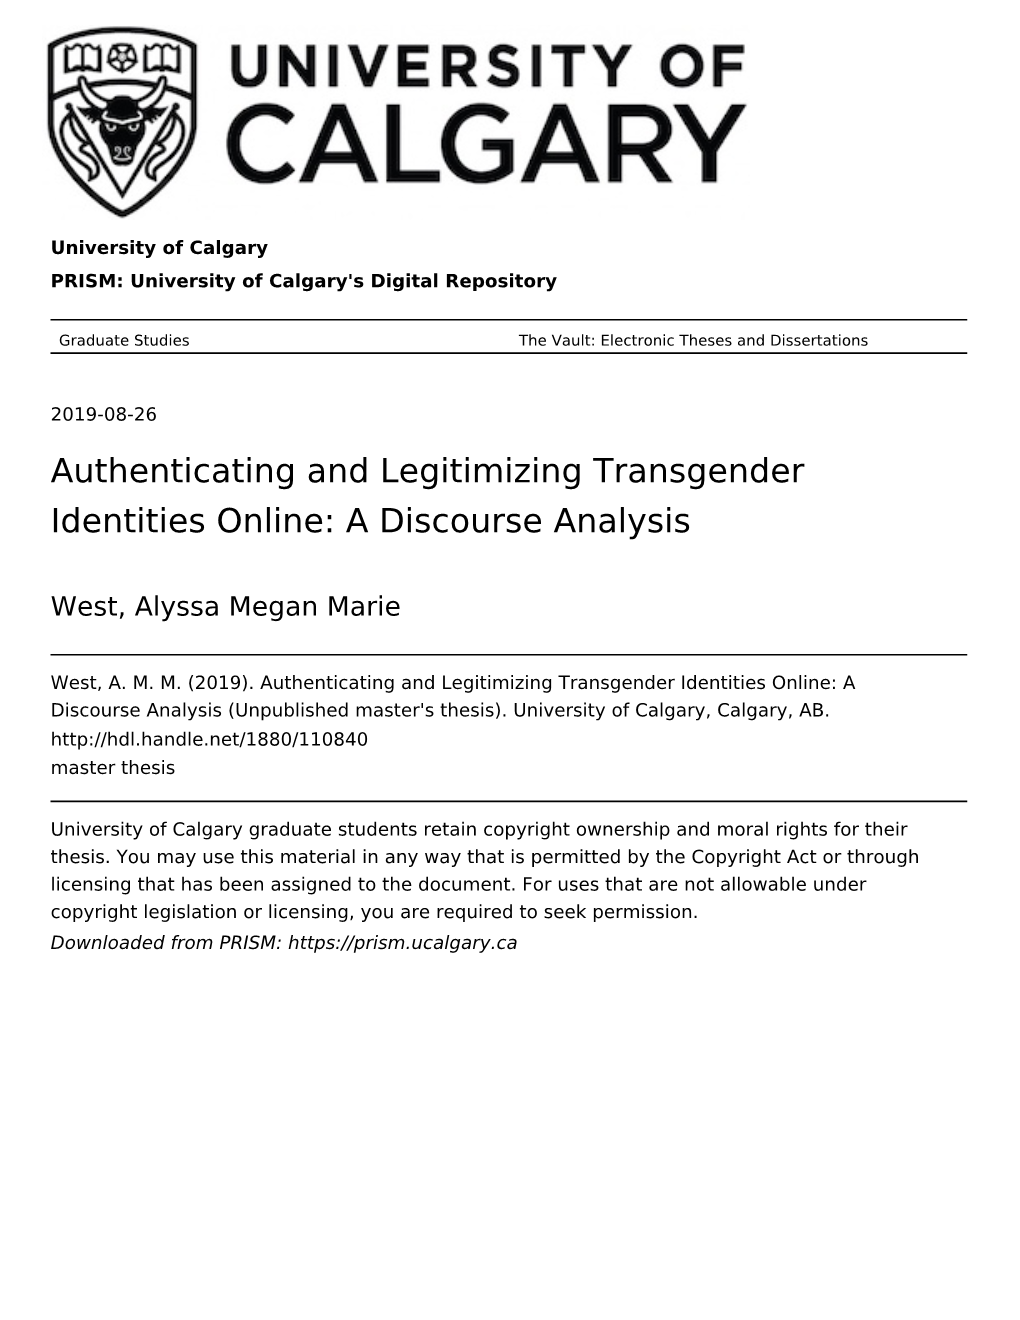 Authenticating and Legitimizing Transgender Identities Online: a Discourse Analysis